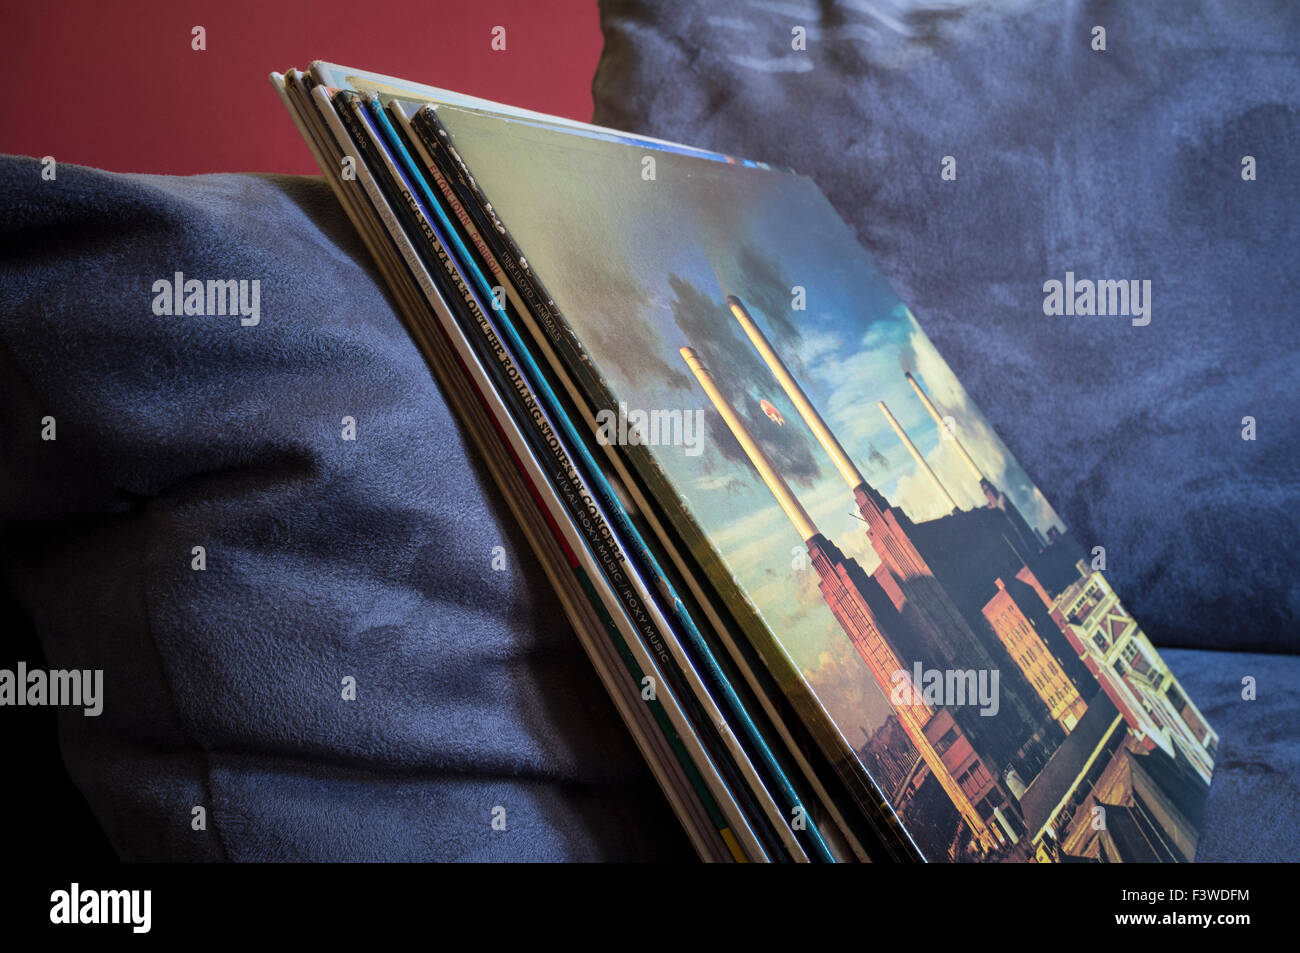 Pile of old vinyl albums on a settee with Pink Floyd's Animals sleeve showing Stock Photo